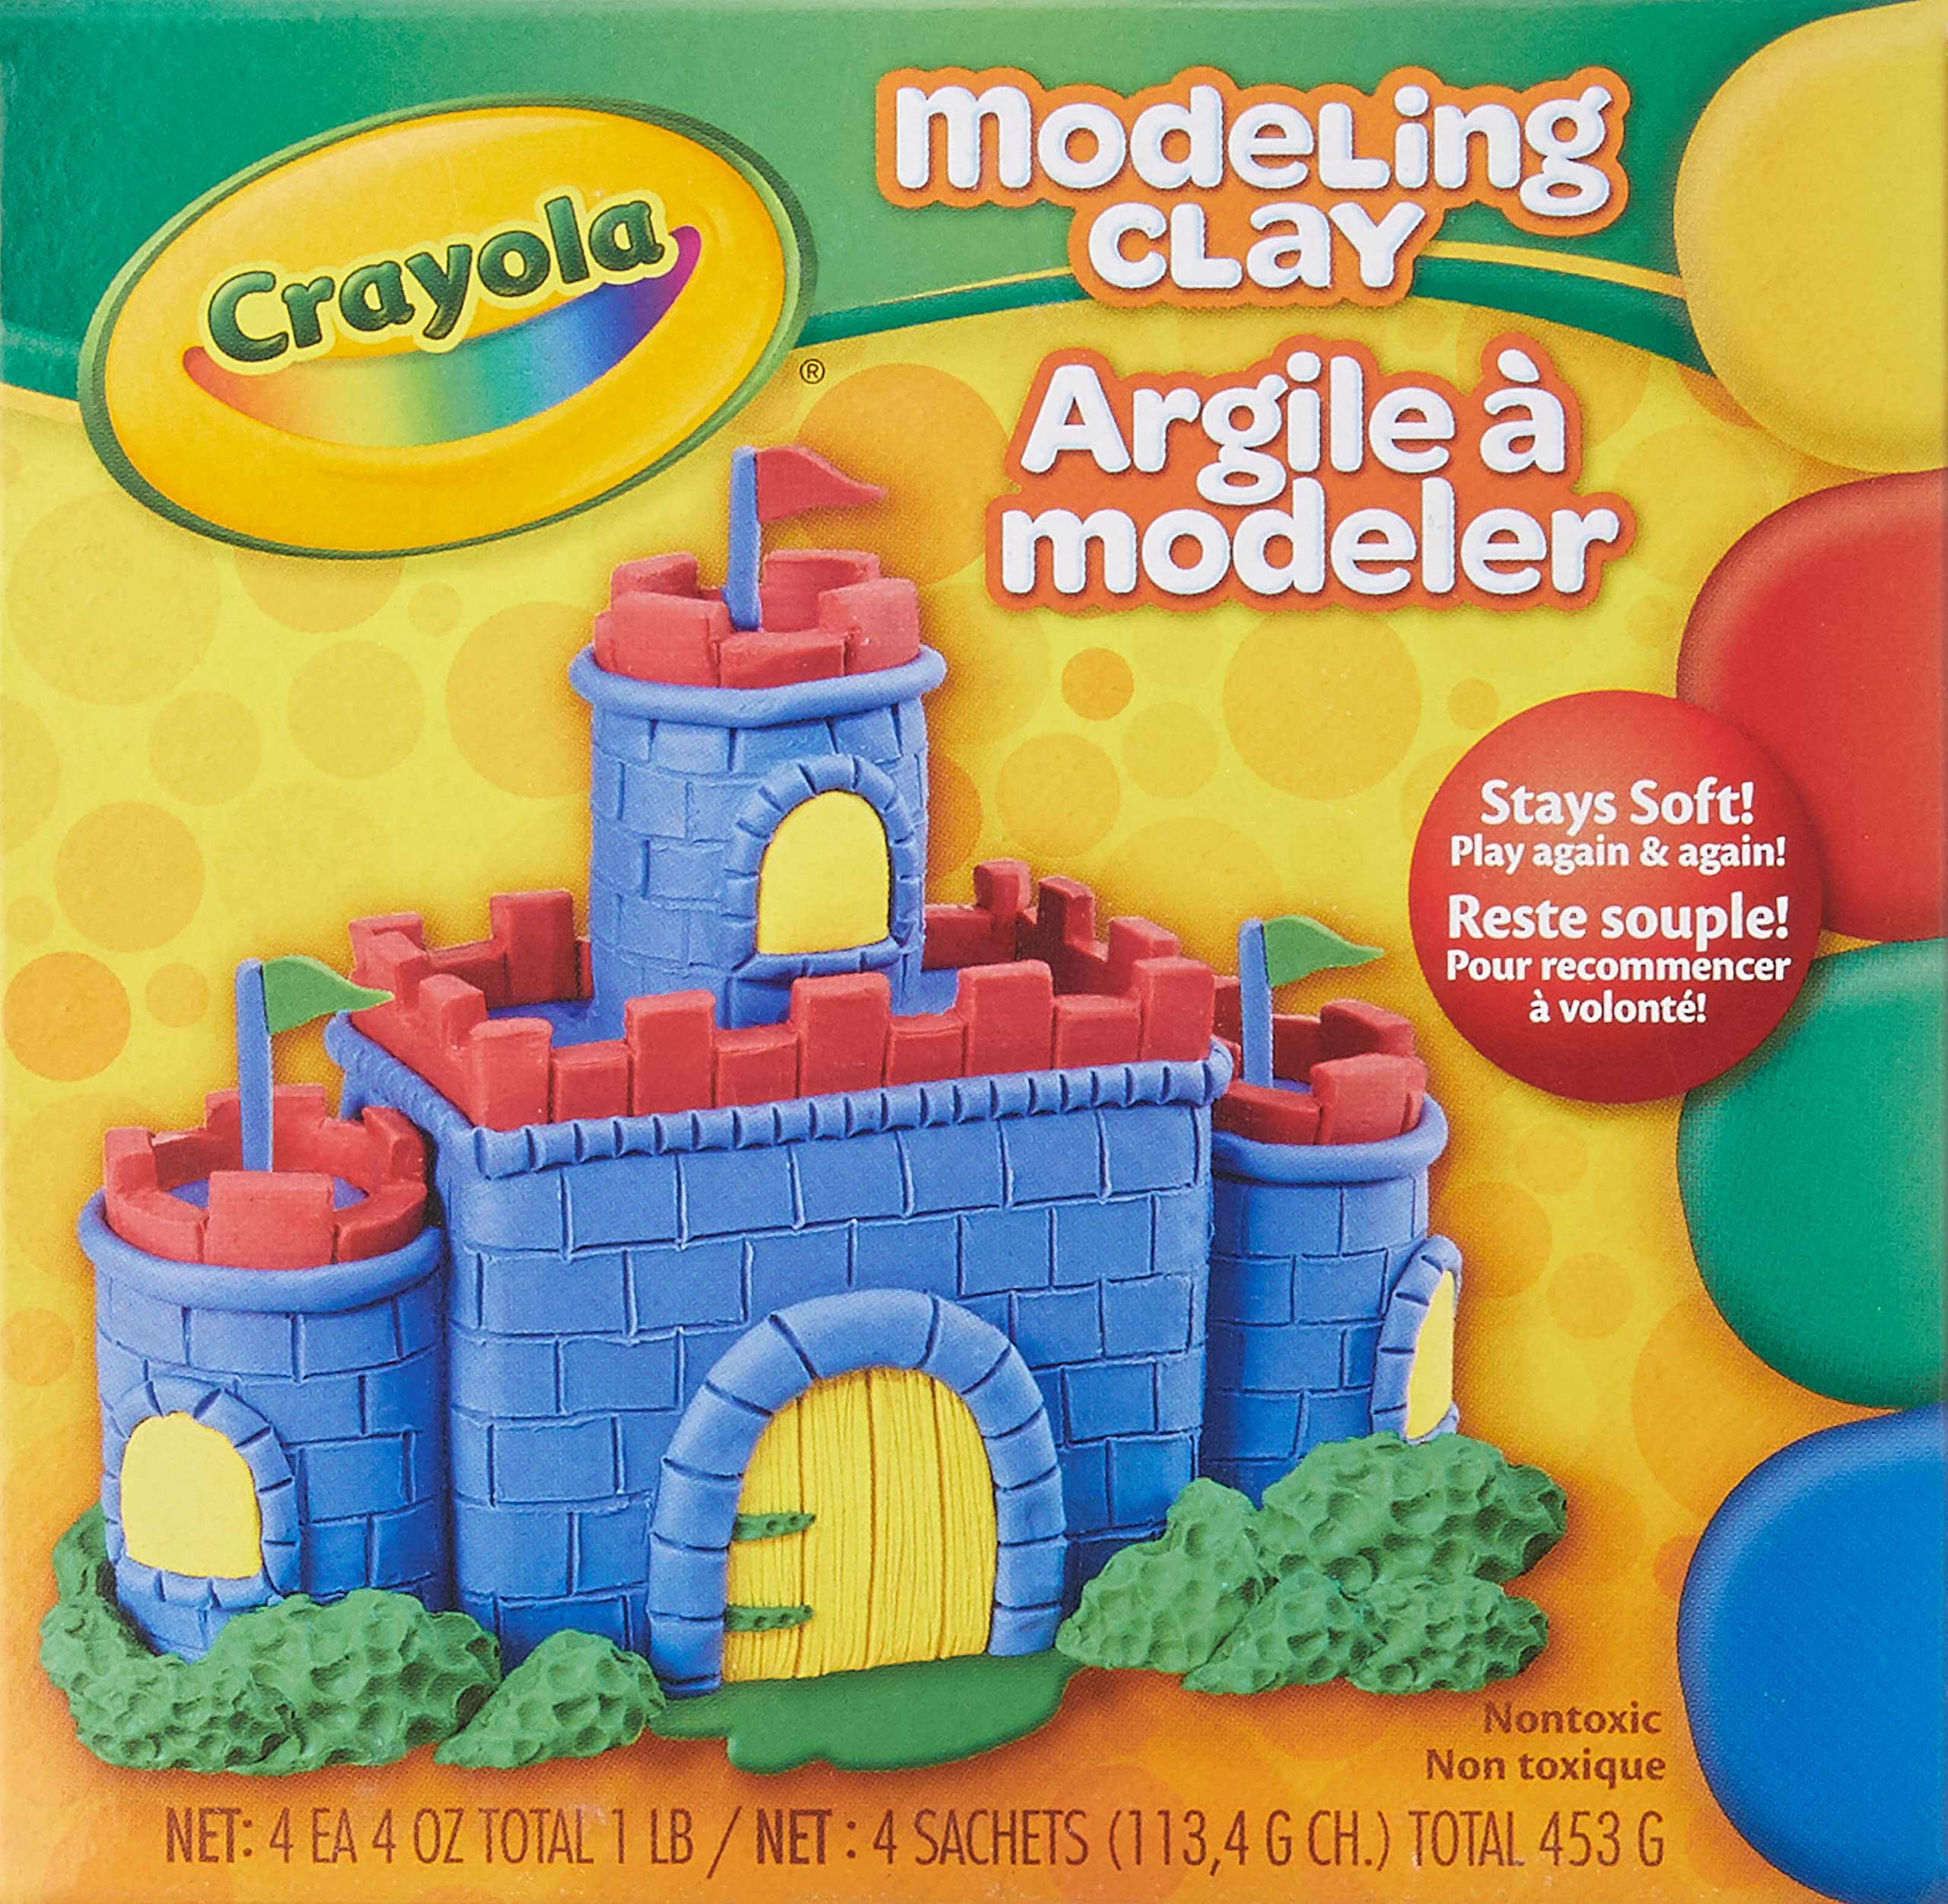 Crayola Modeling Clay, 4 Classic Colors (16 oz), Art and School Supplies for Kids, Gifts for Boys & Girls